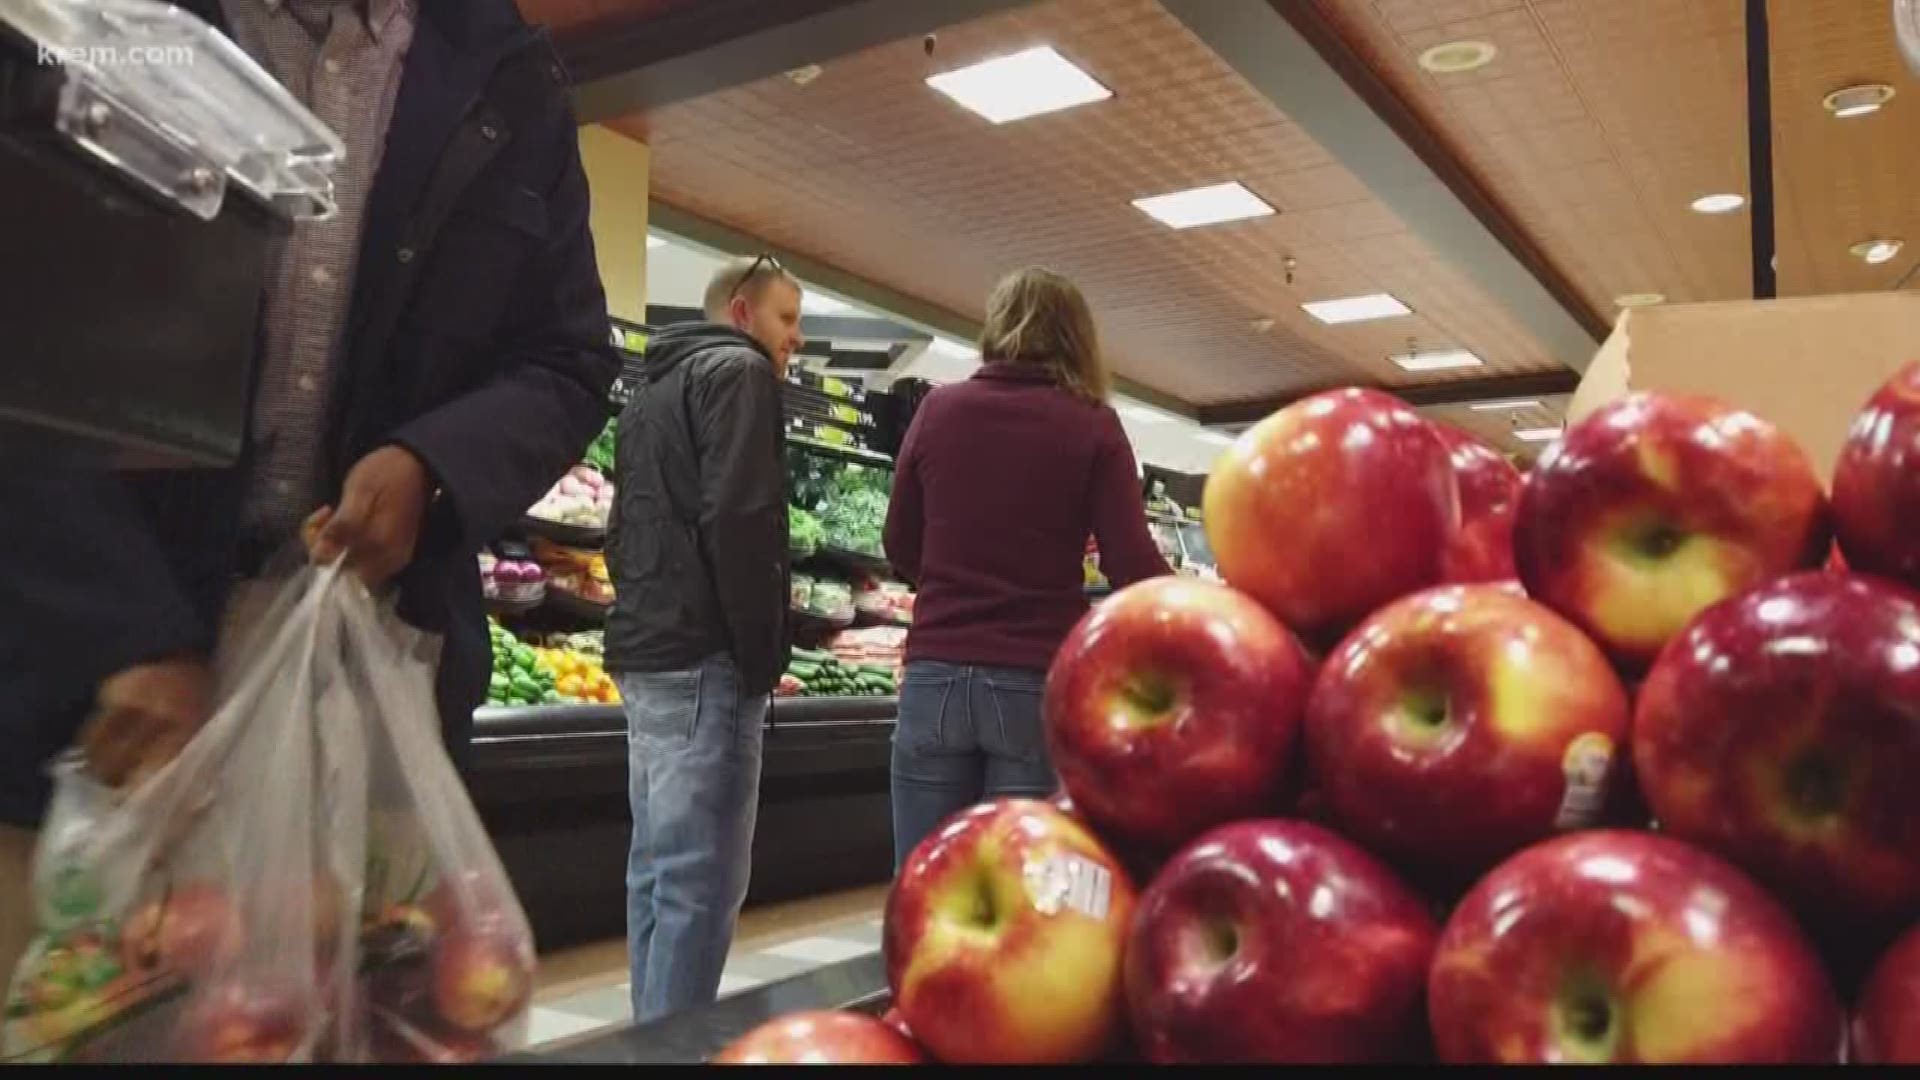 The long-awaited Cosmic Crisp apply developed by WSU has hit the shelves in Spokane. The apple is supposed to stay juicy and flavorful through months of storage.